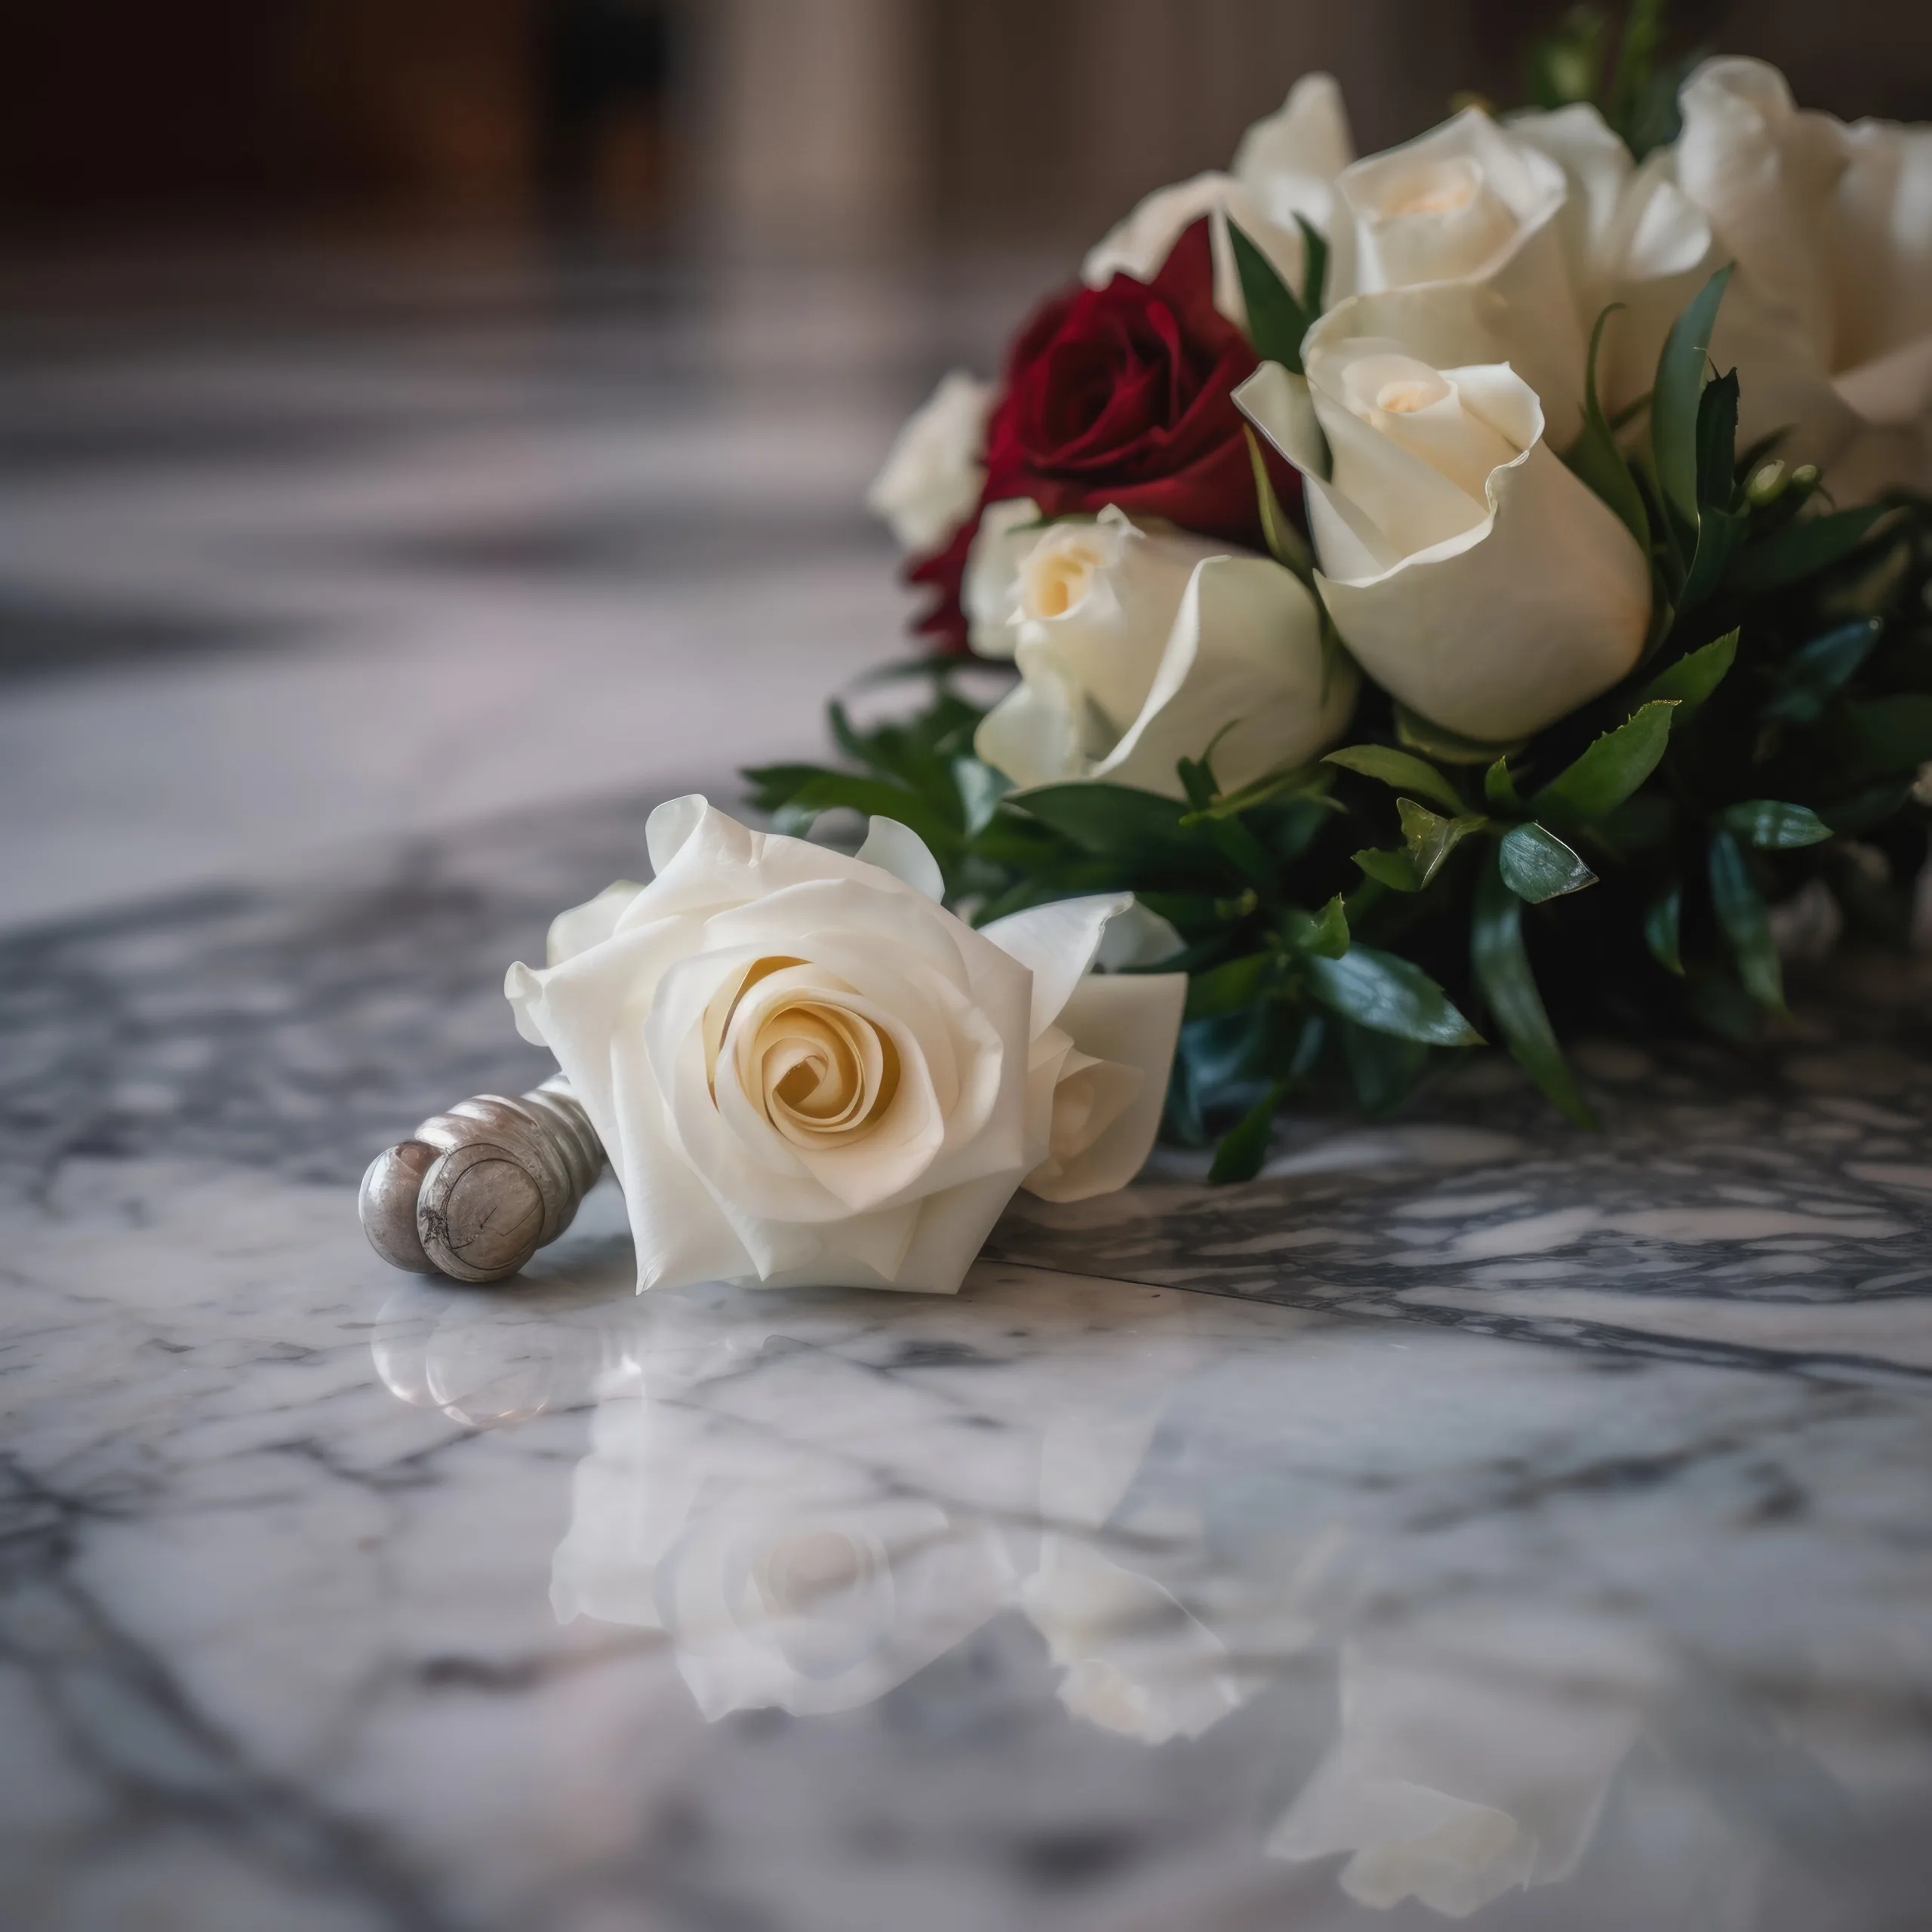 Village hall weddings: a bouquet of white and red roses on a marble table.